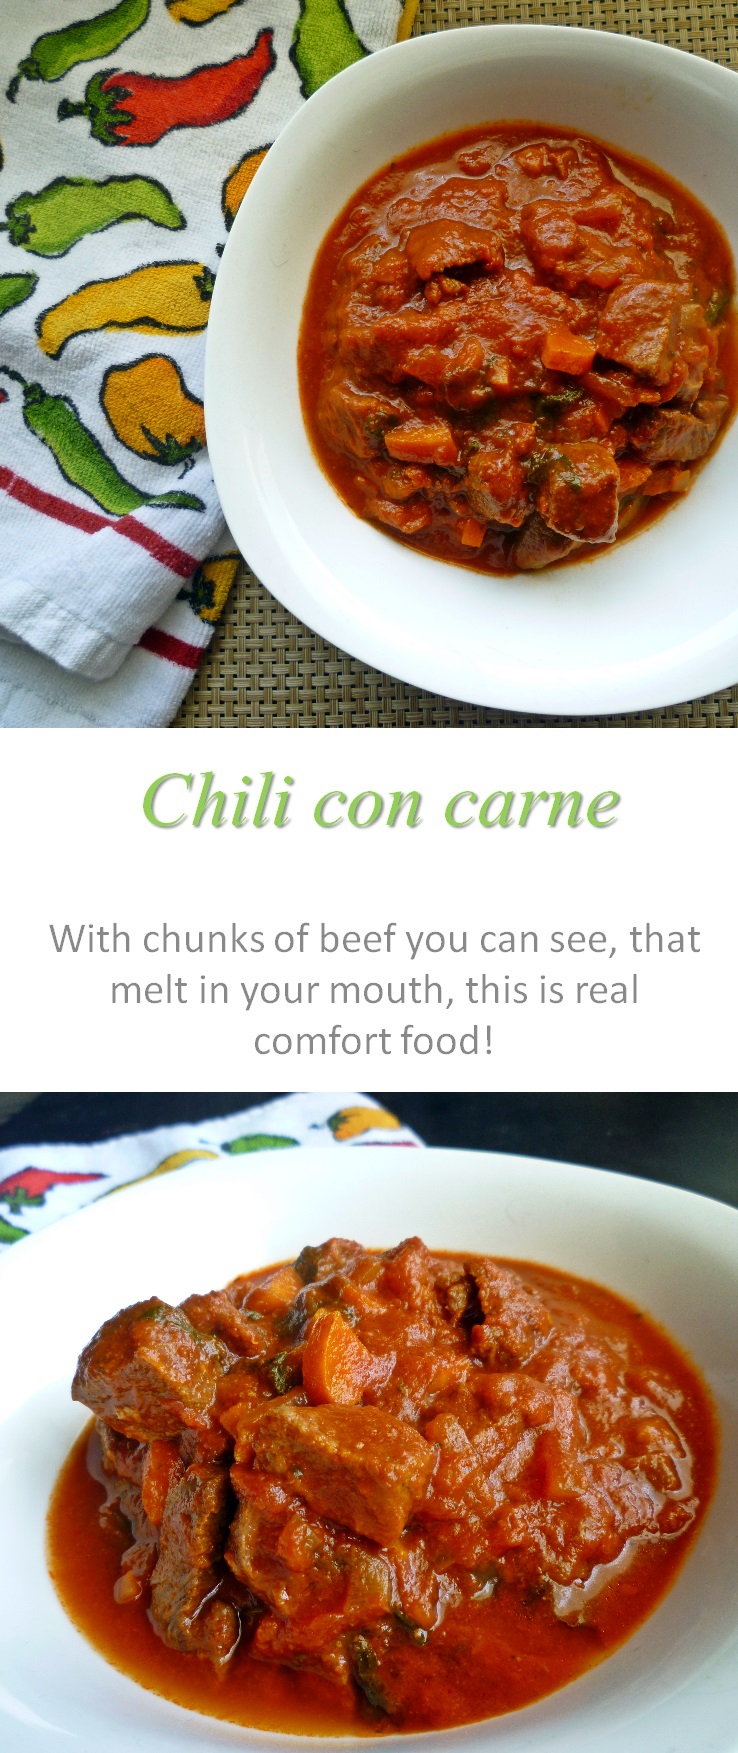 A really simple and yummy chili con carne recipe that you set and forget in the slow cooker, with chunks of tender, fall-off-the-fork beef. #chili